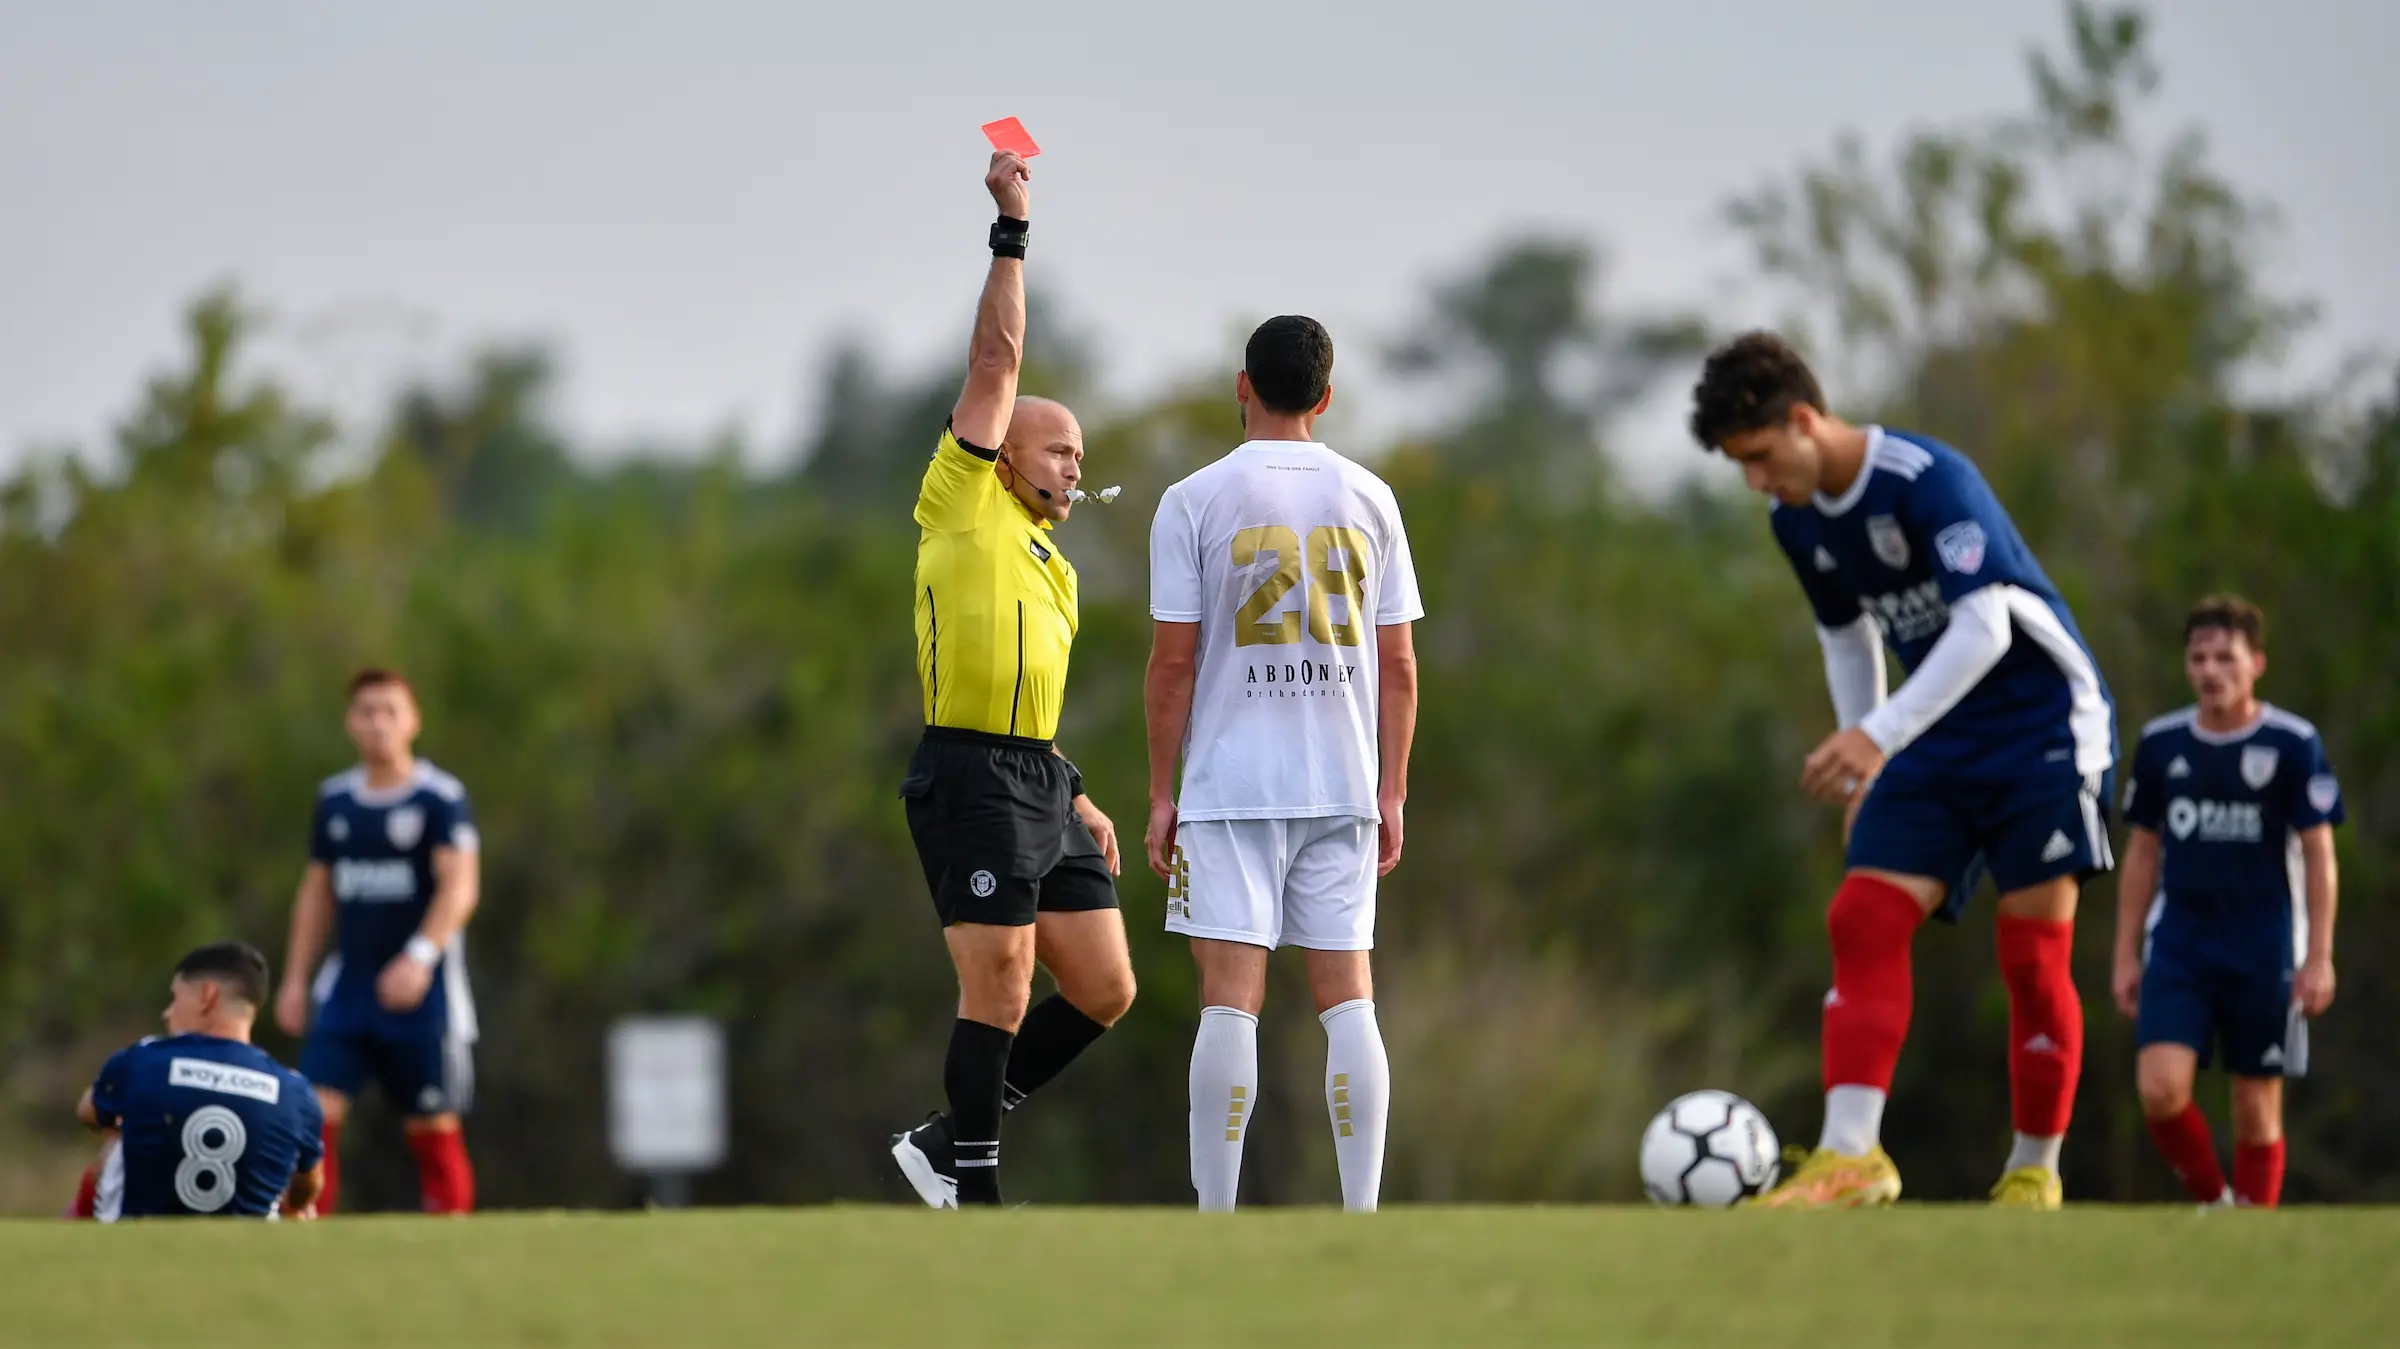 Tantrums and Solutions in Youth Soccer